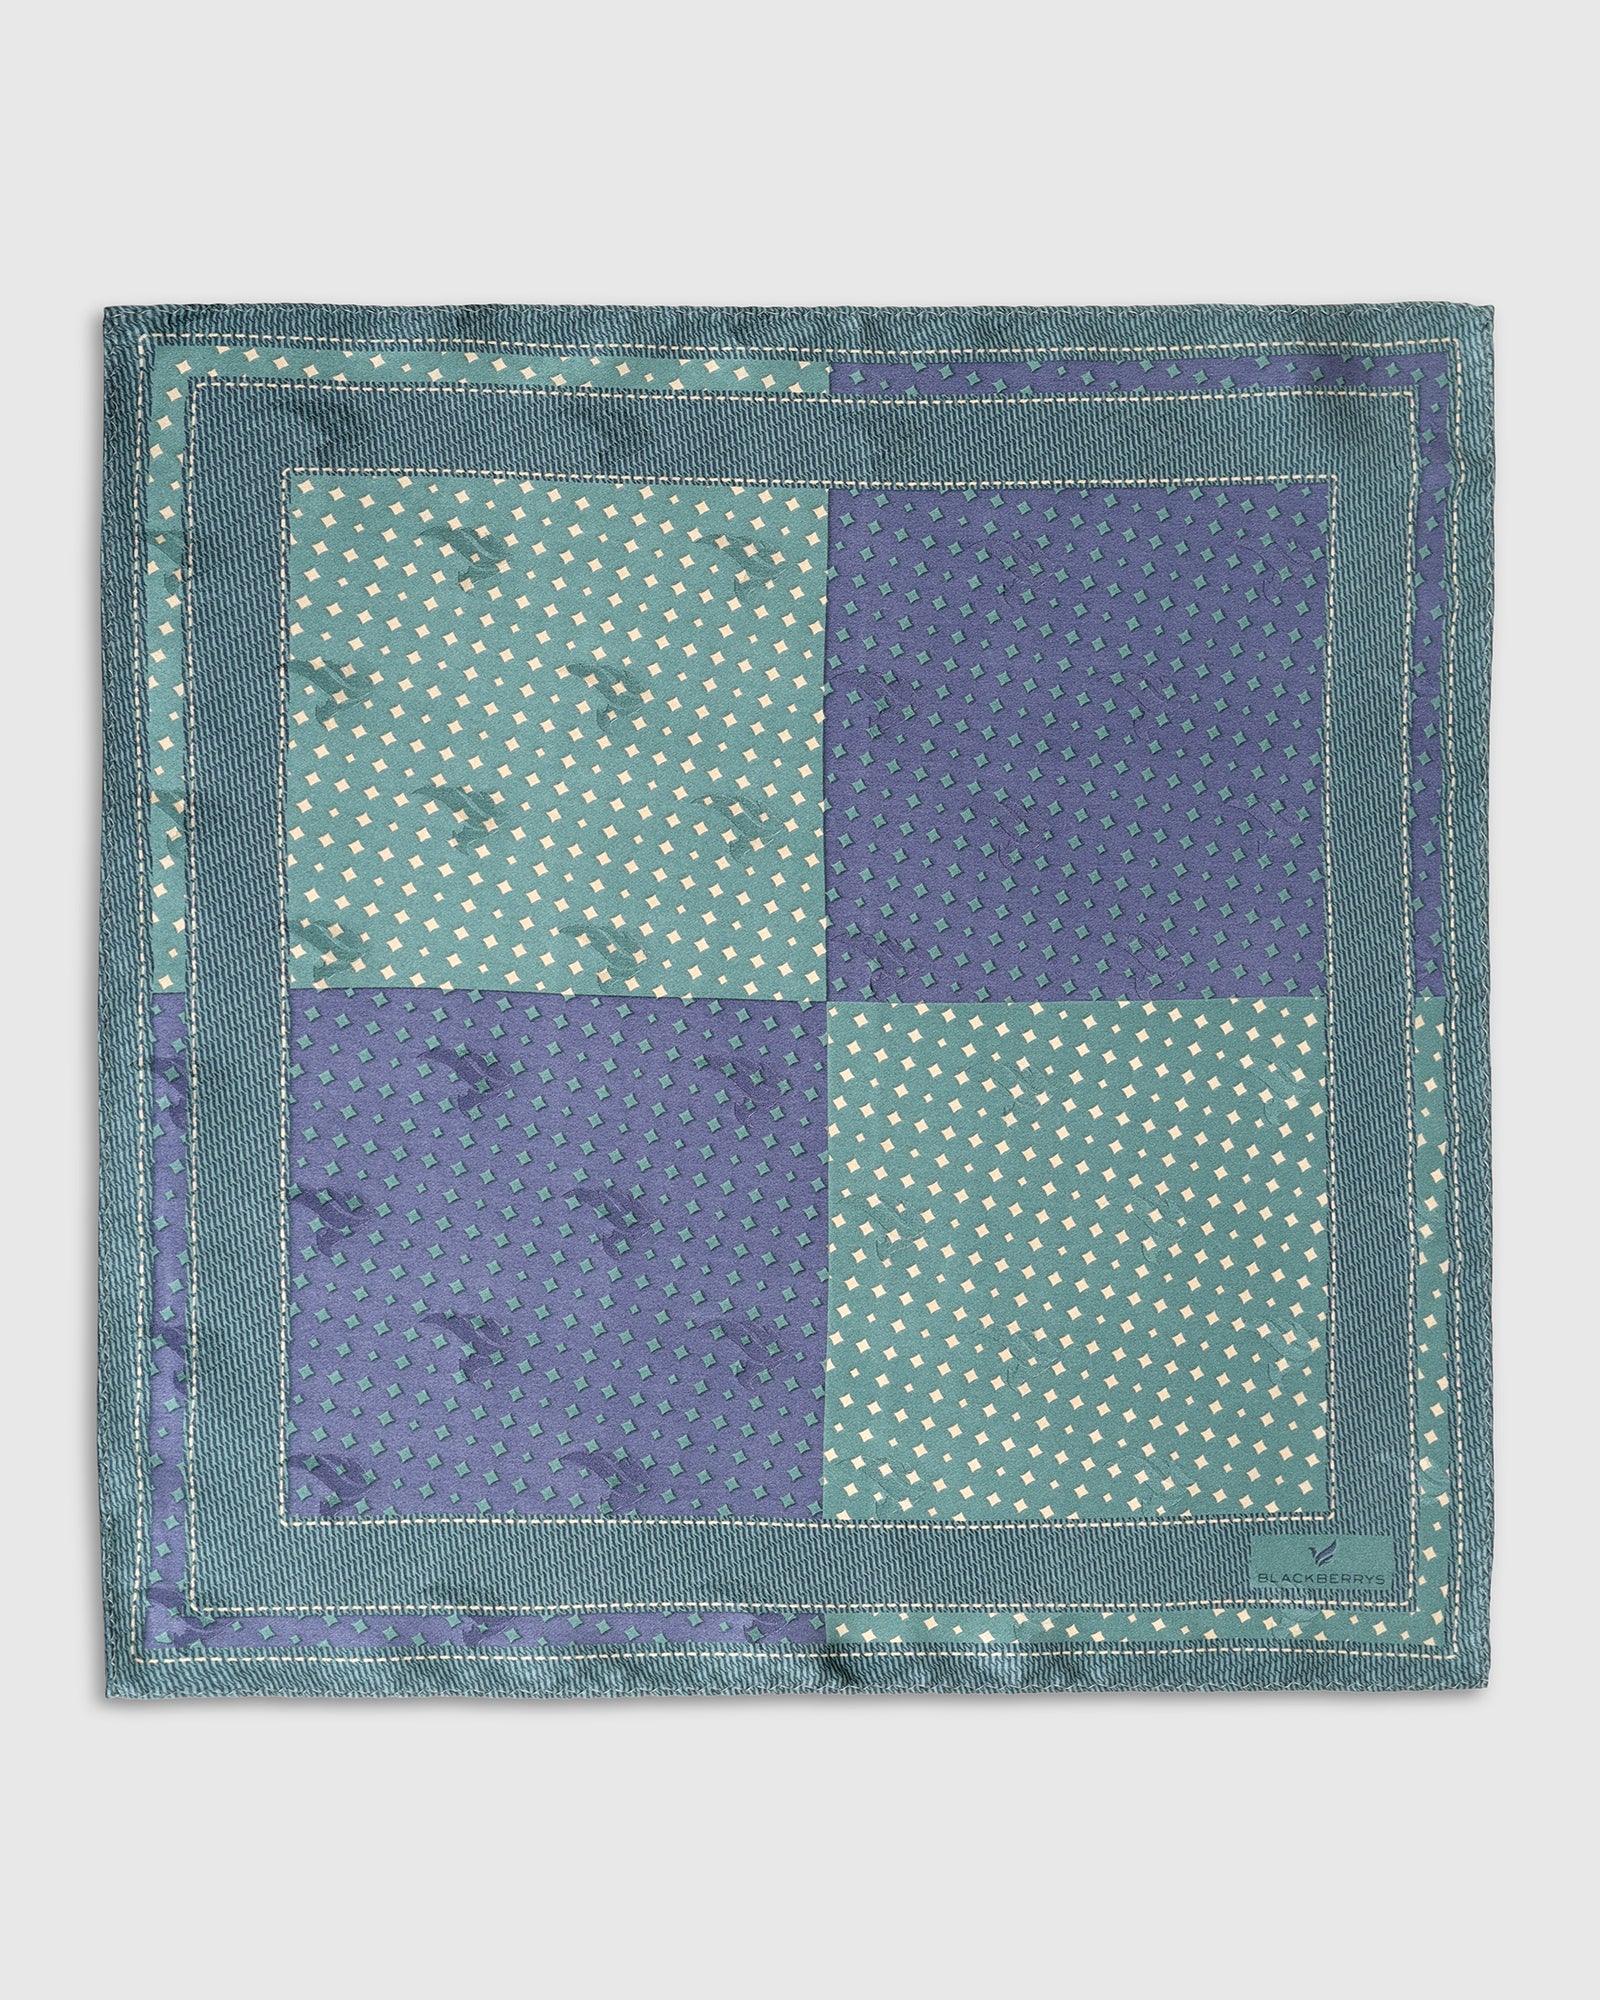 Boxed Combo Printed Tie And Pocket Square In Teal - Tapir